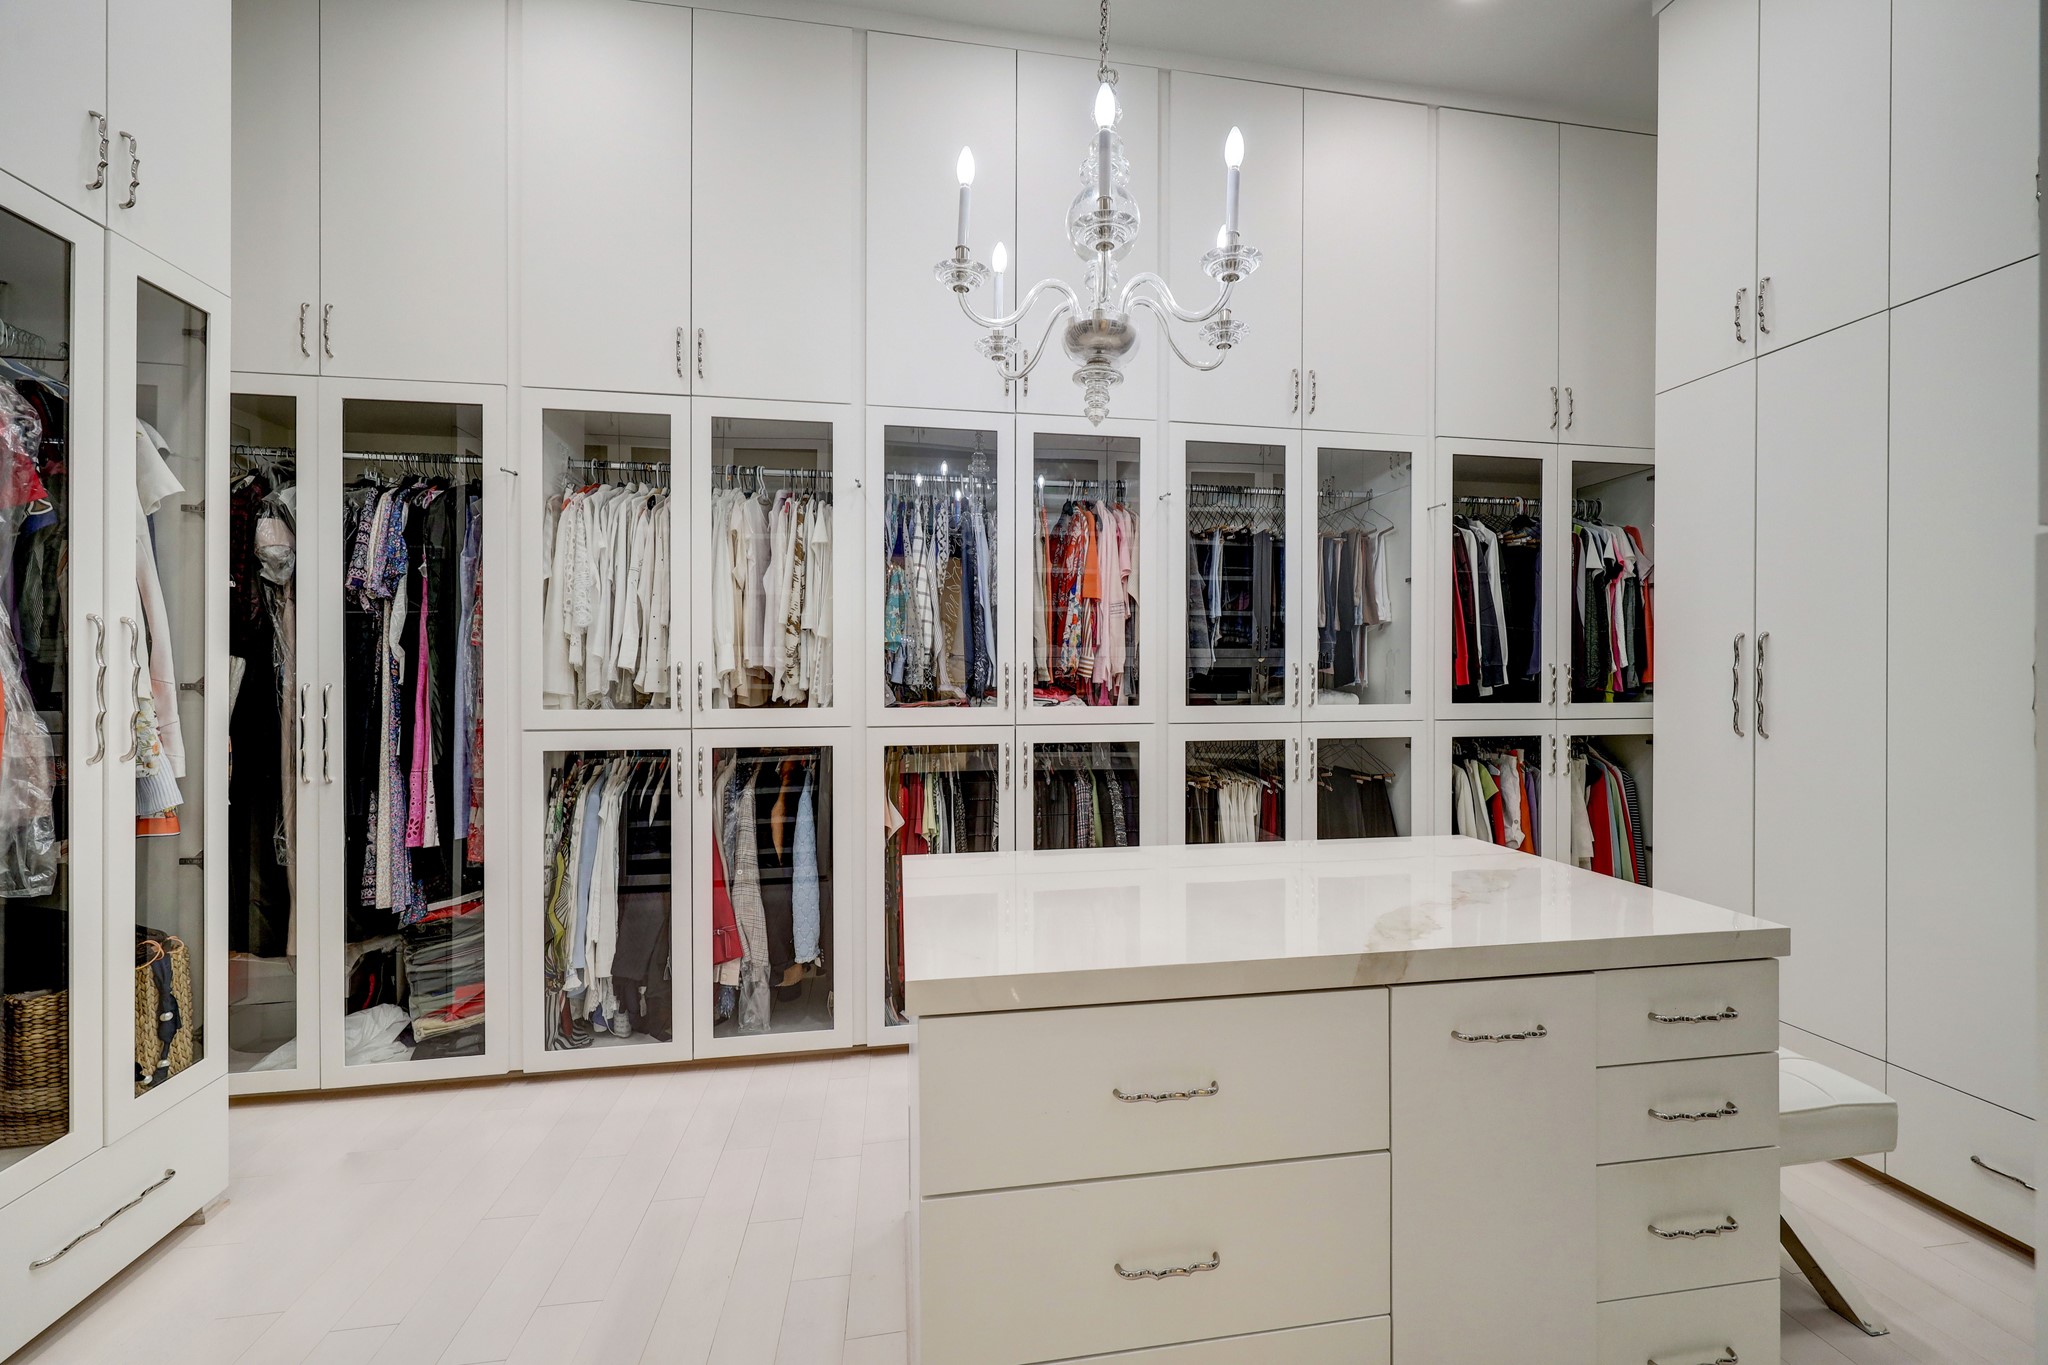 [Primary Closet 1
Bespoke closets offer vestibule entries, packing shelves, glass-front wardrobe and cabinet storage, and custom-fitted accessories storage. One closet includes a beverage bar and under-counter refrigerator.